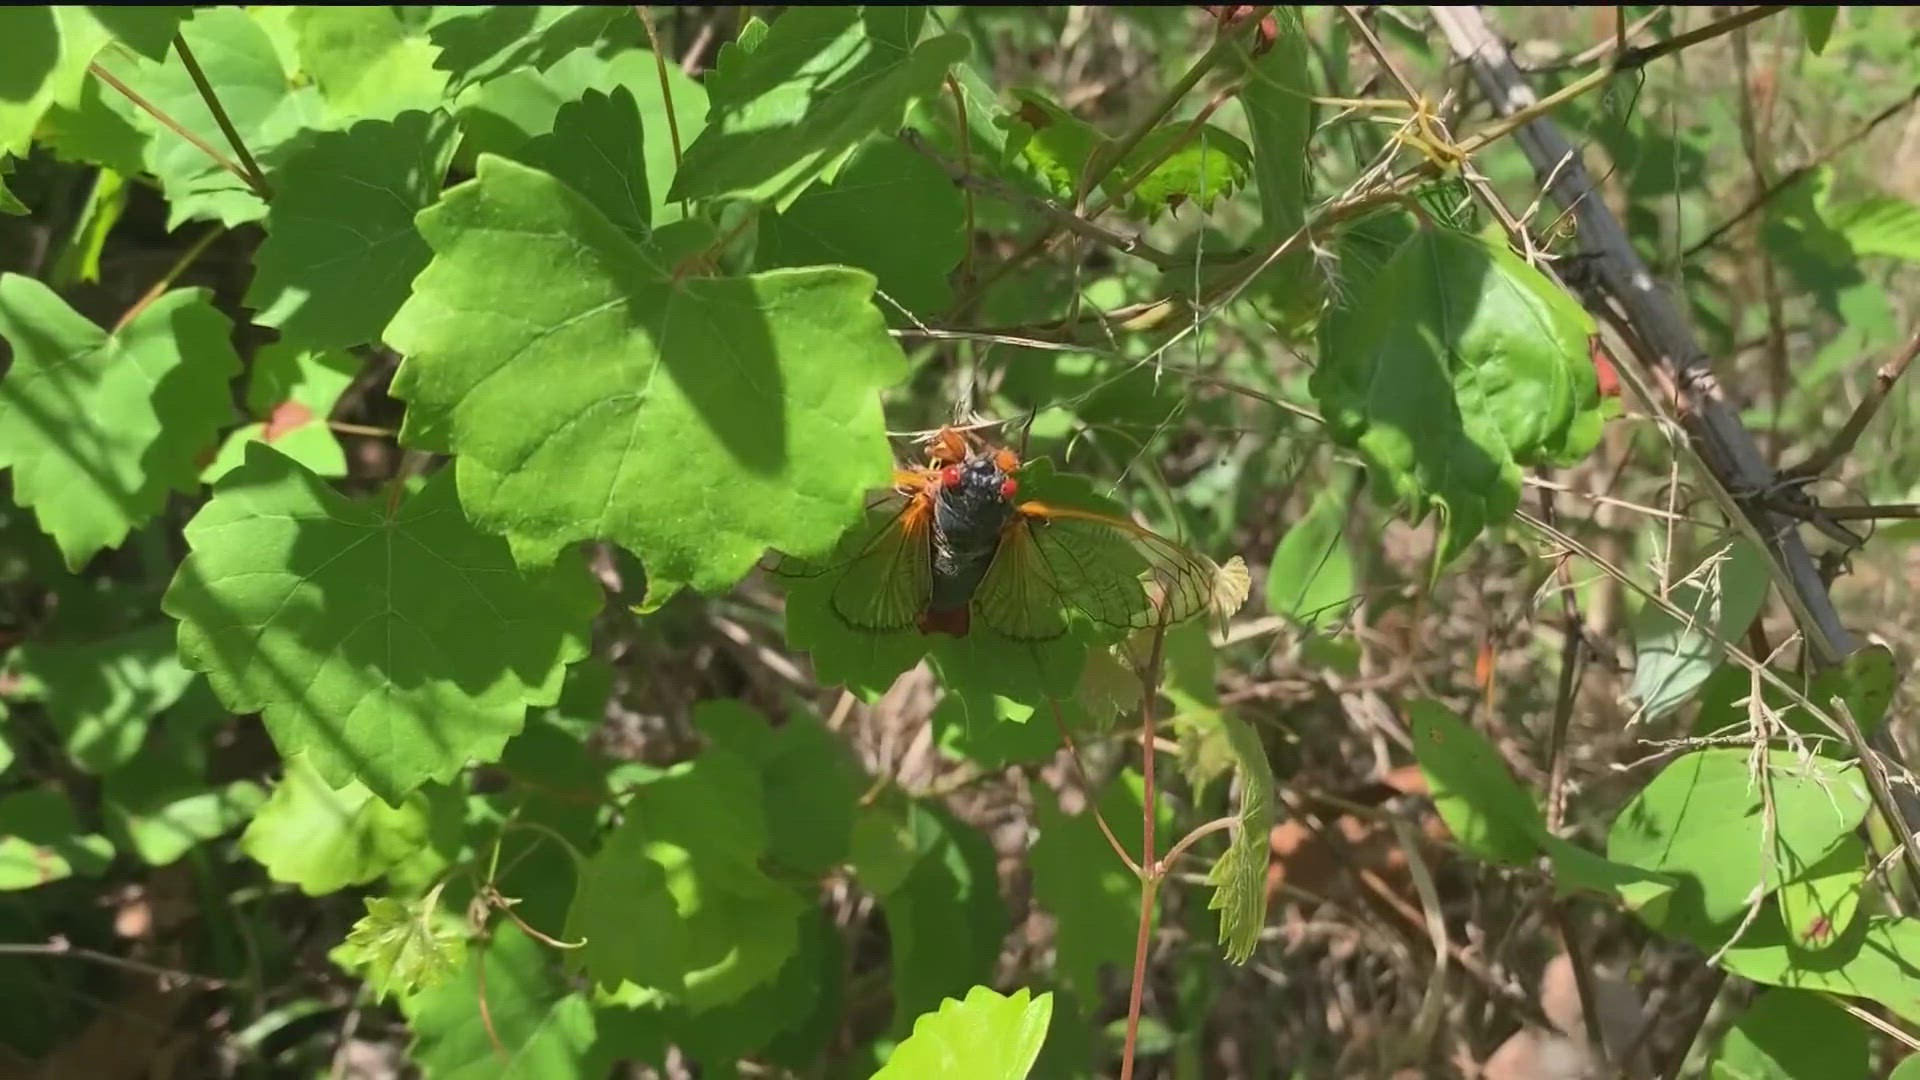 We're starting to get reports of cicadas emerging from around Georgia.